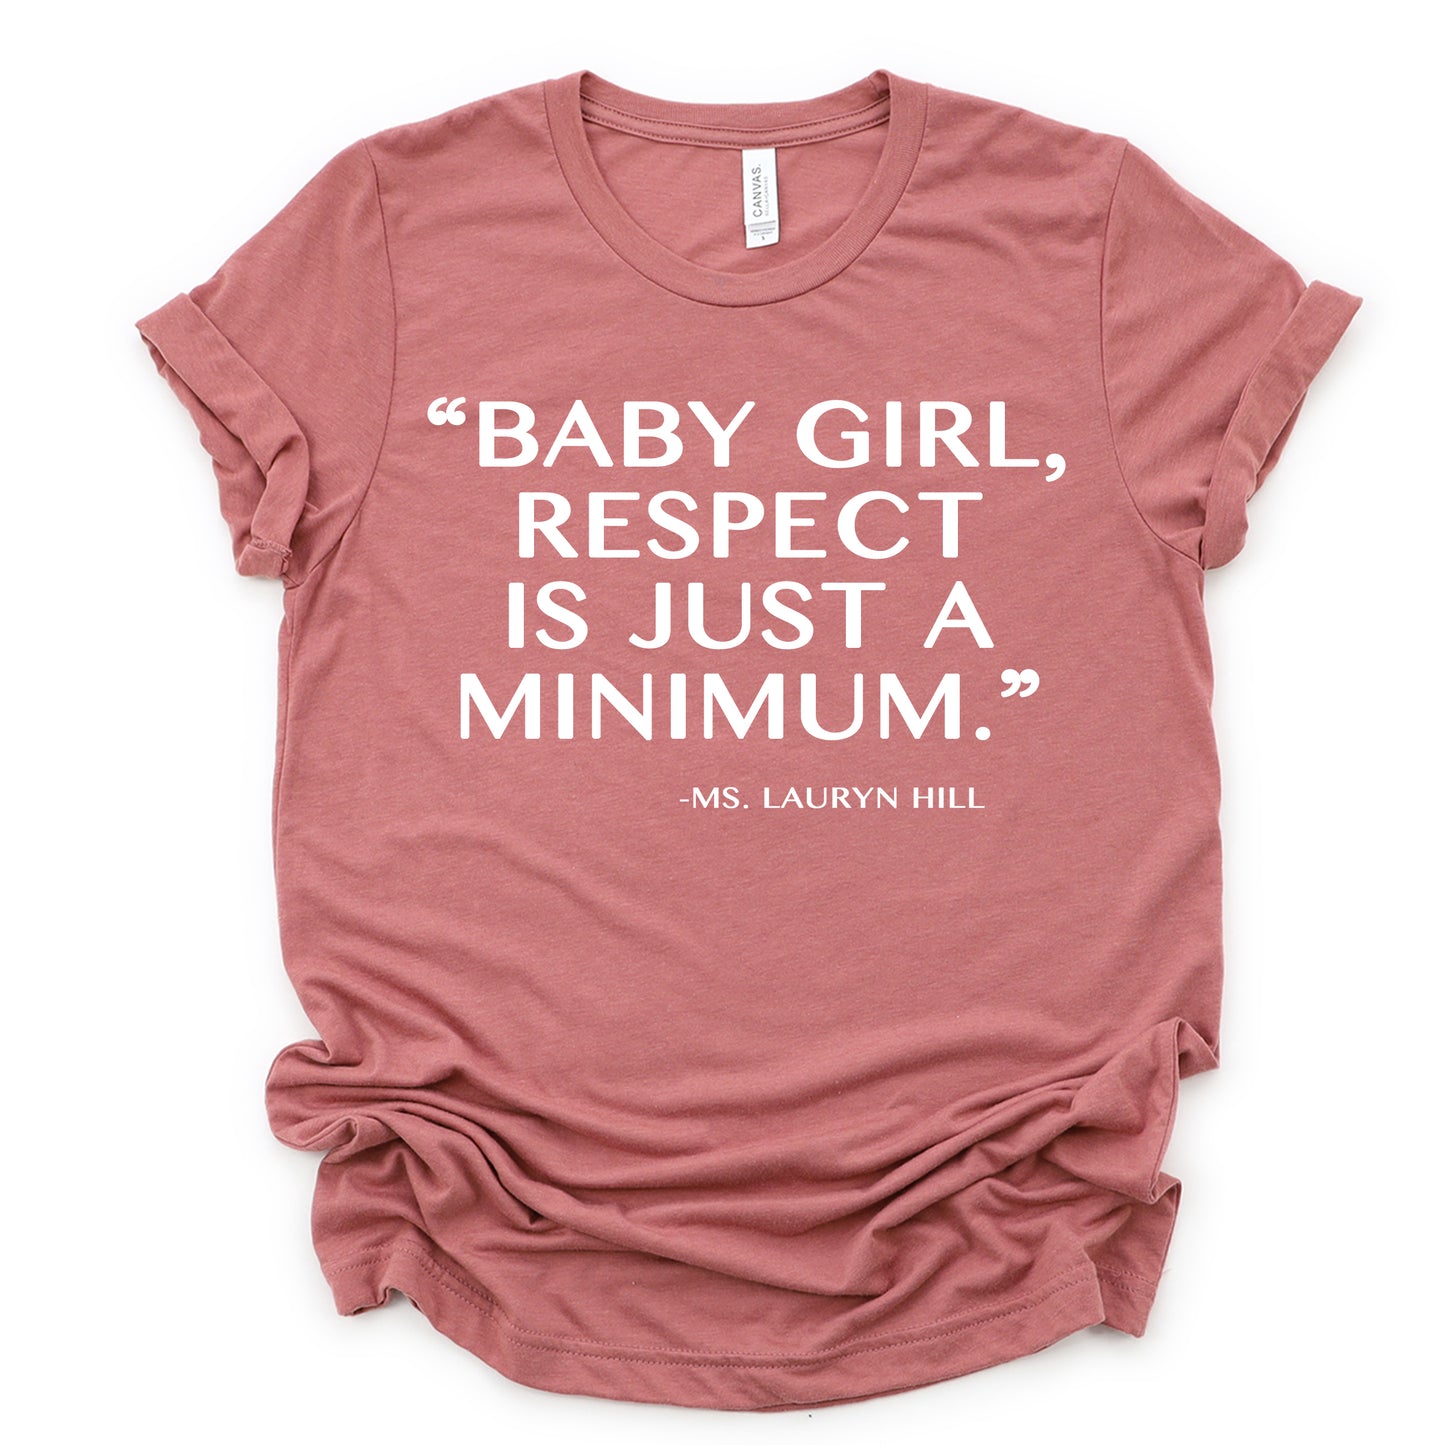 "Respect Is Just A Minimum" Tee